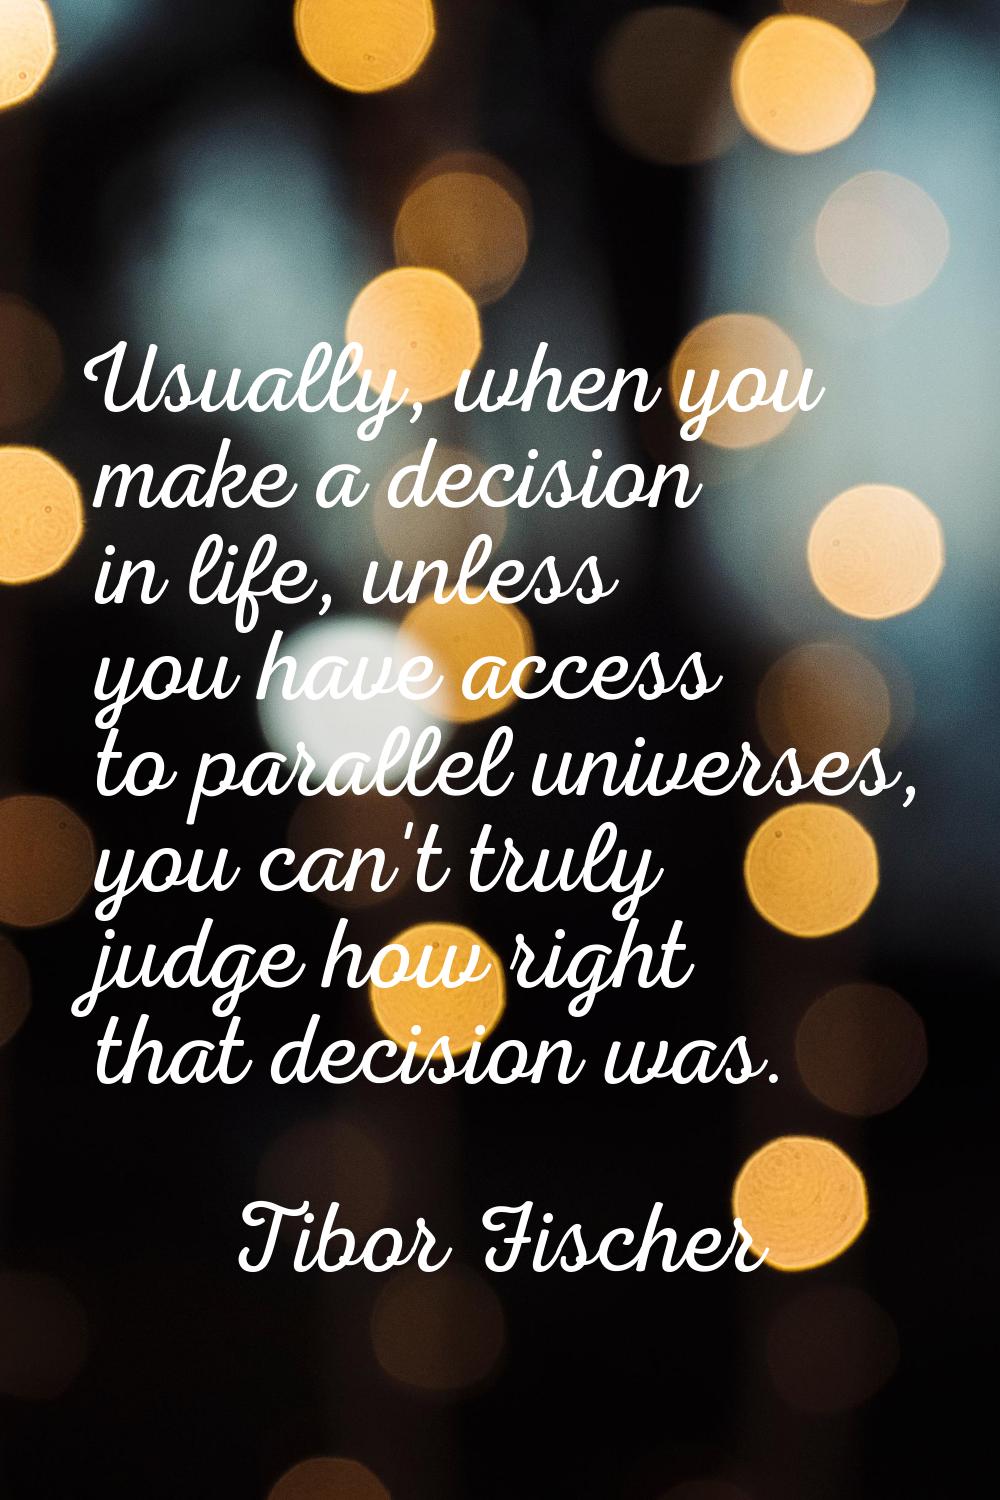 Usually, when you make a decision in life, unless you have access to parallel universes, you can't 